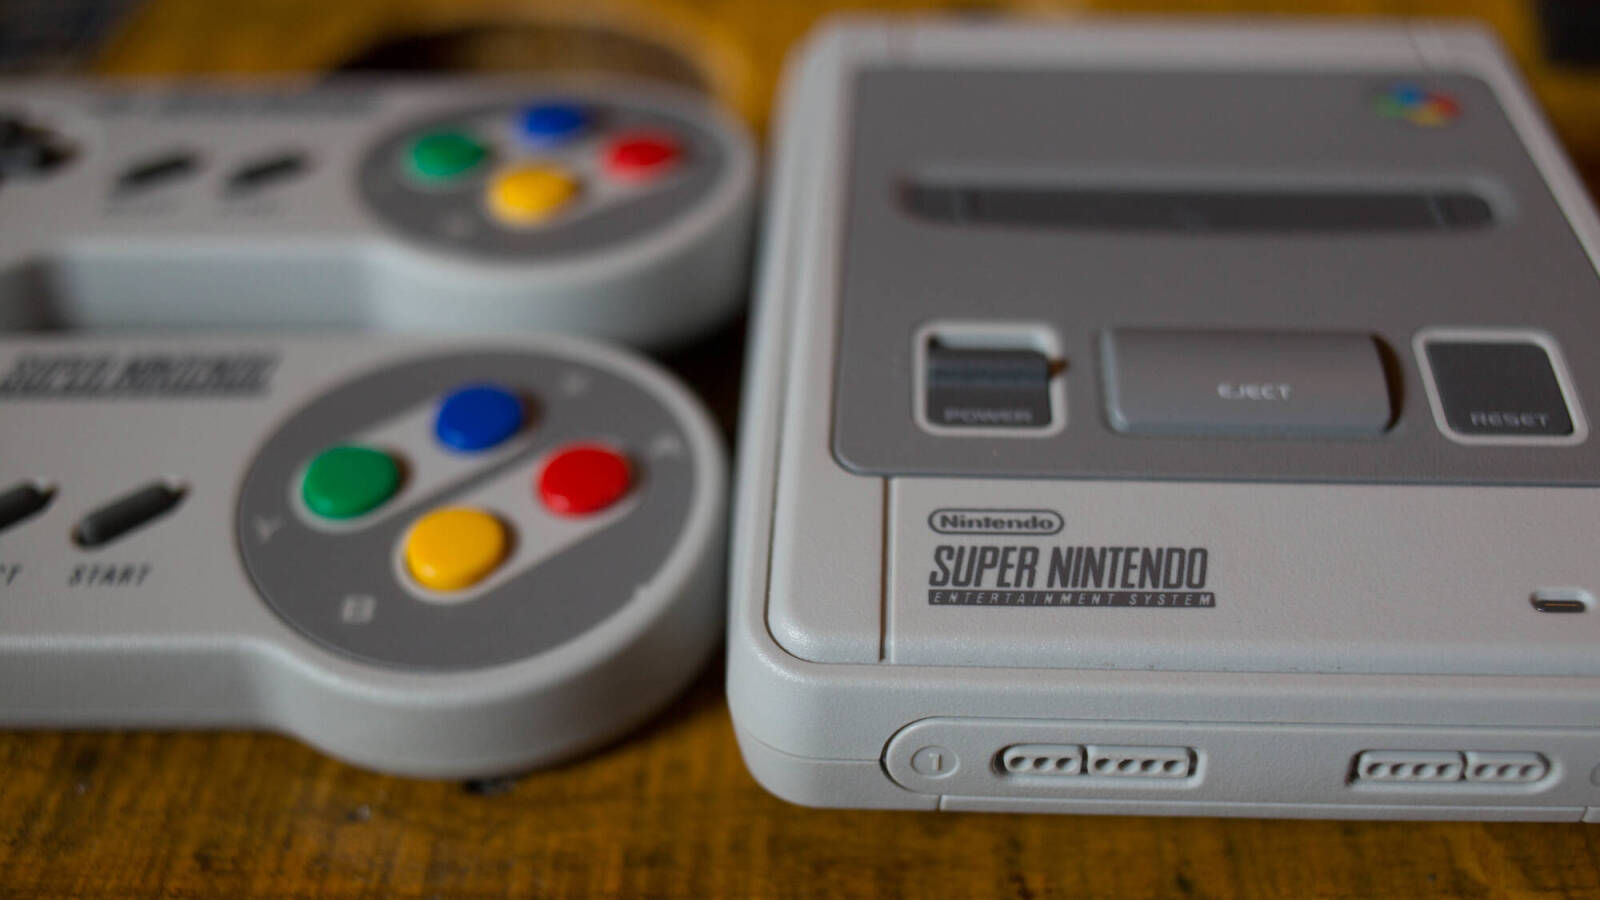 The 20 hardest games for the Super Nintendo